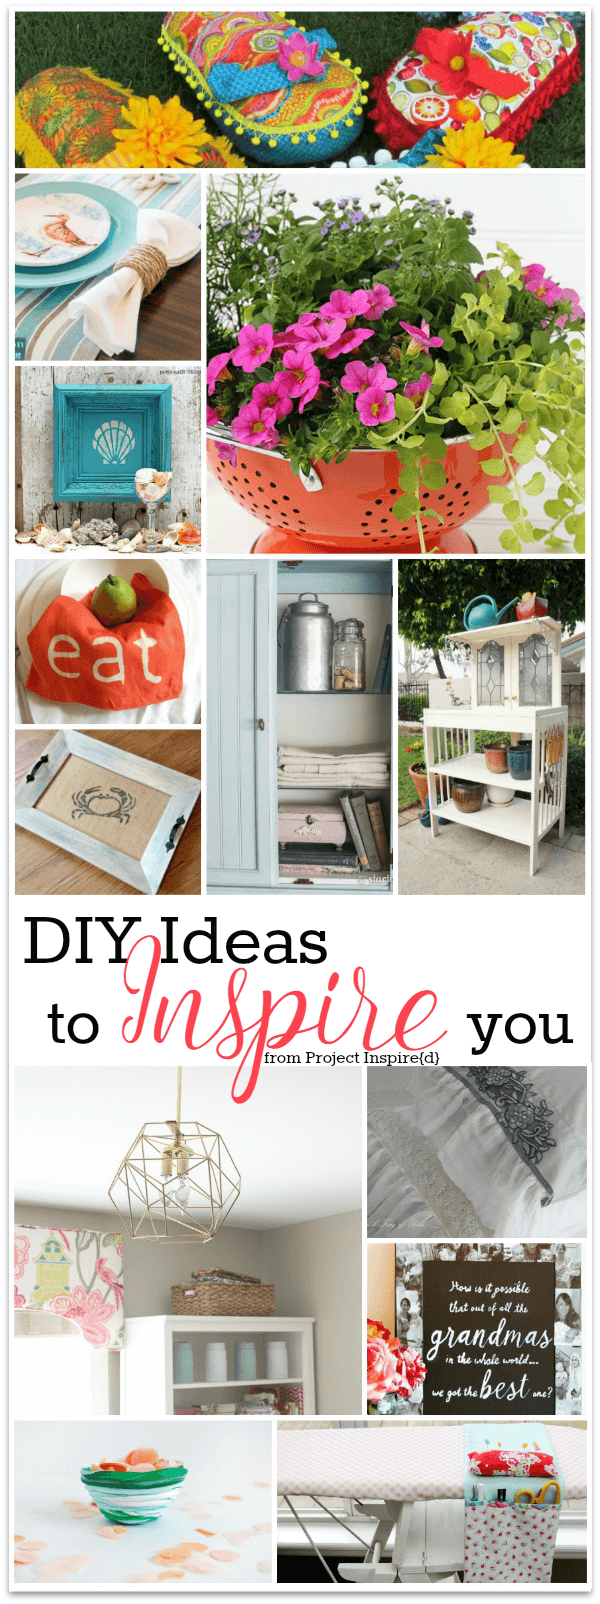 13 Creative Home Decor Ideas to Inspire You from Project Inspired - AnExtraordinaryDay.net